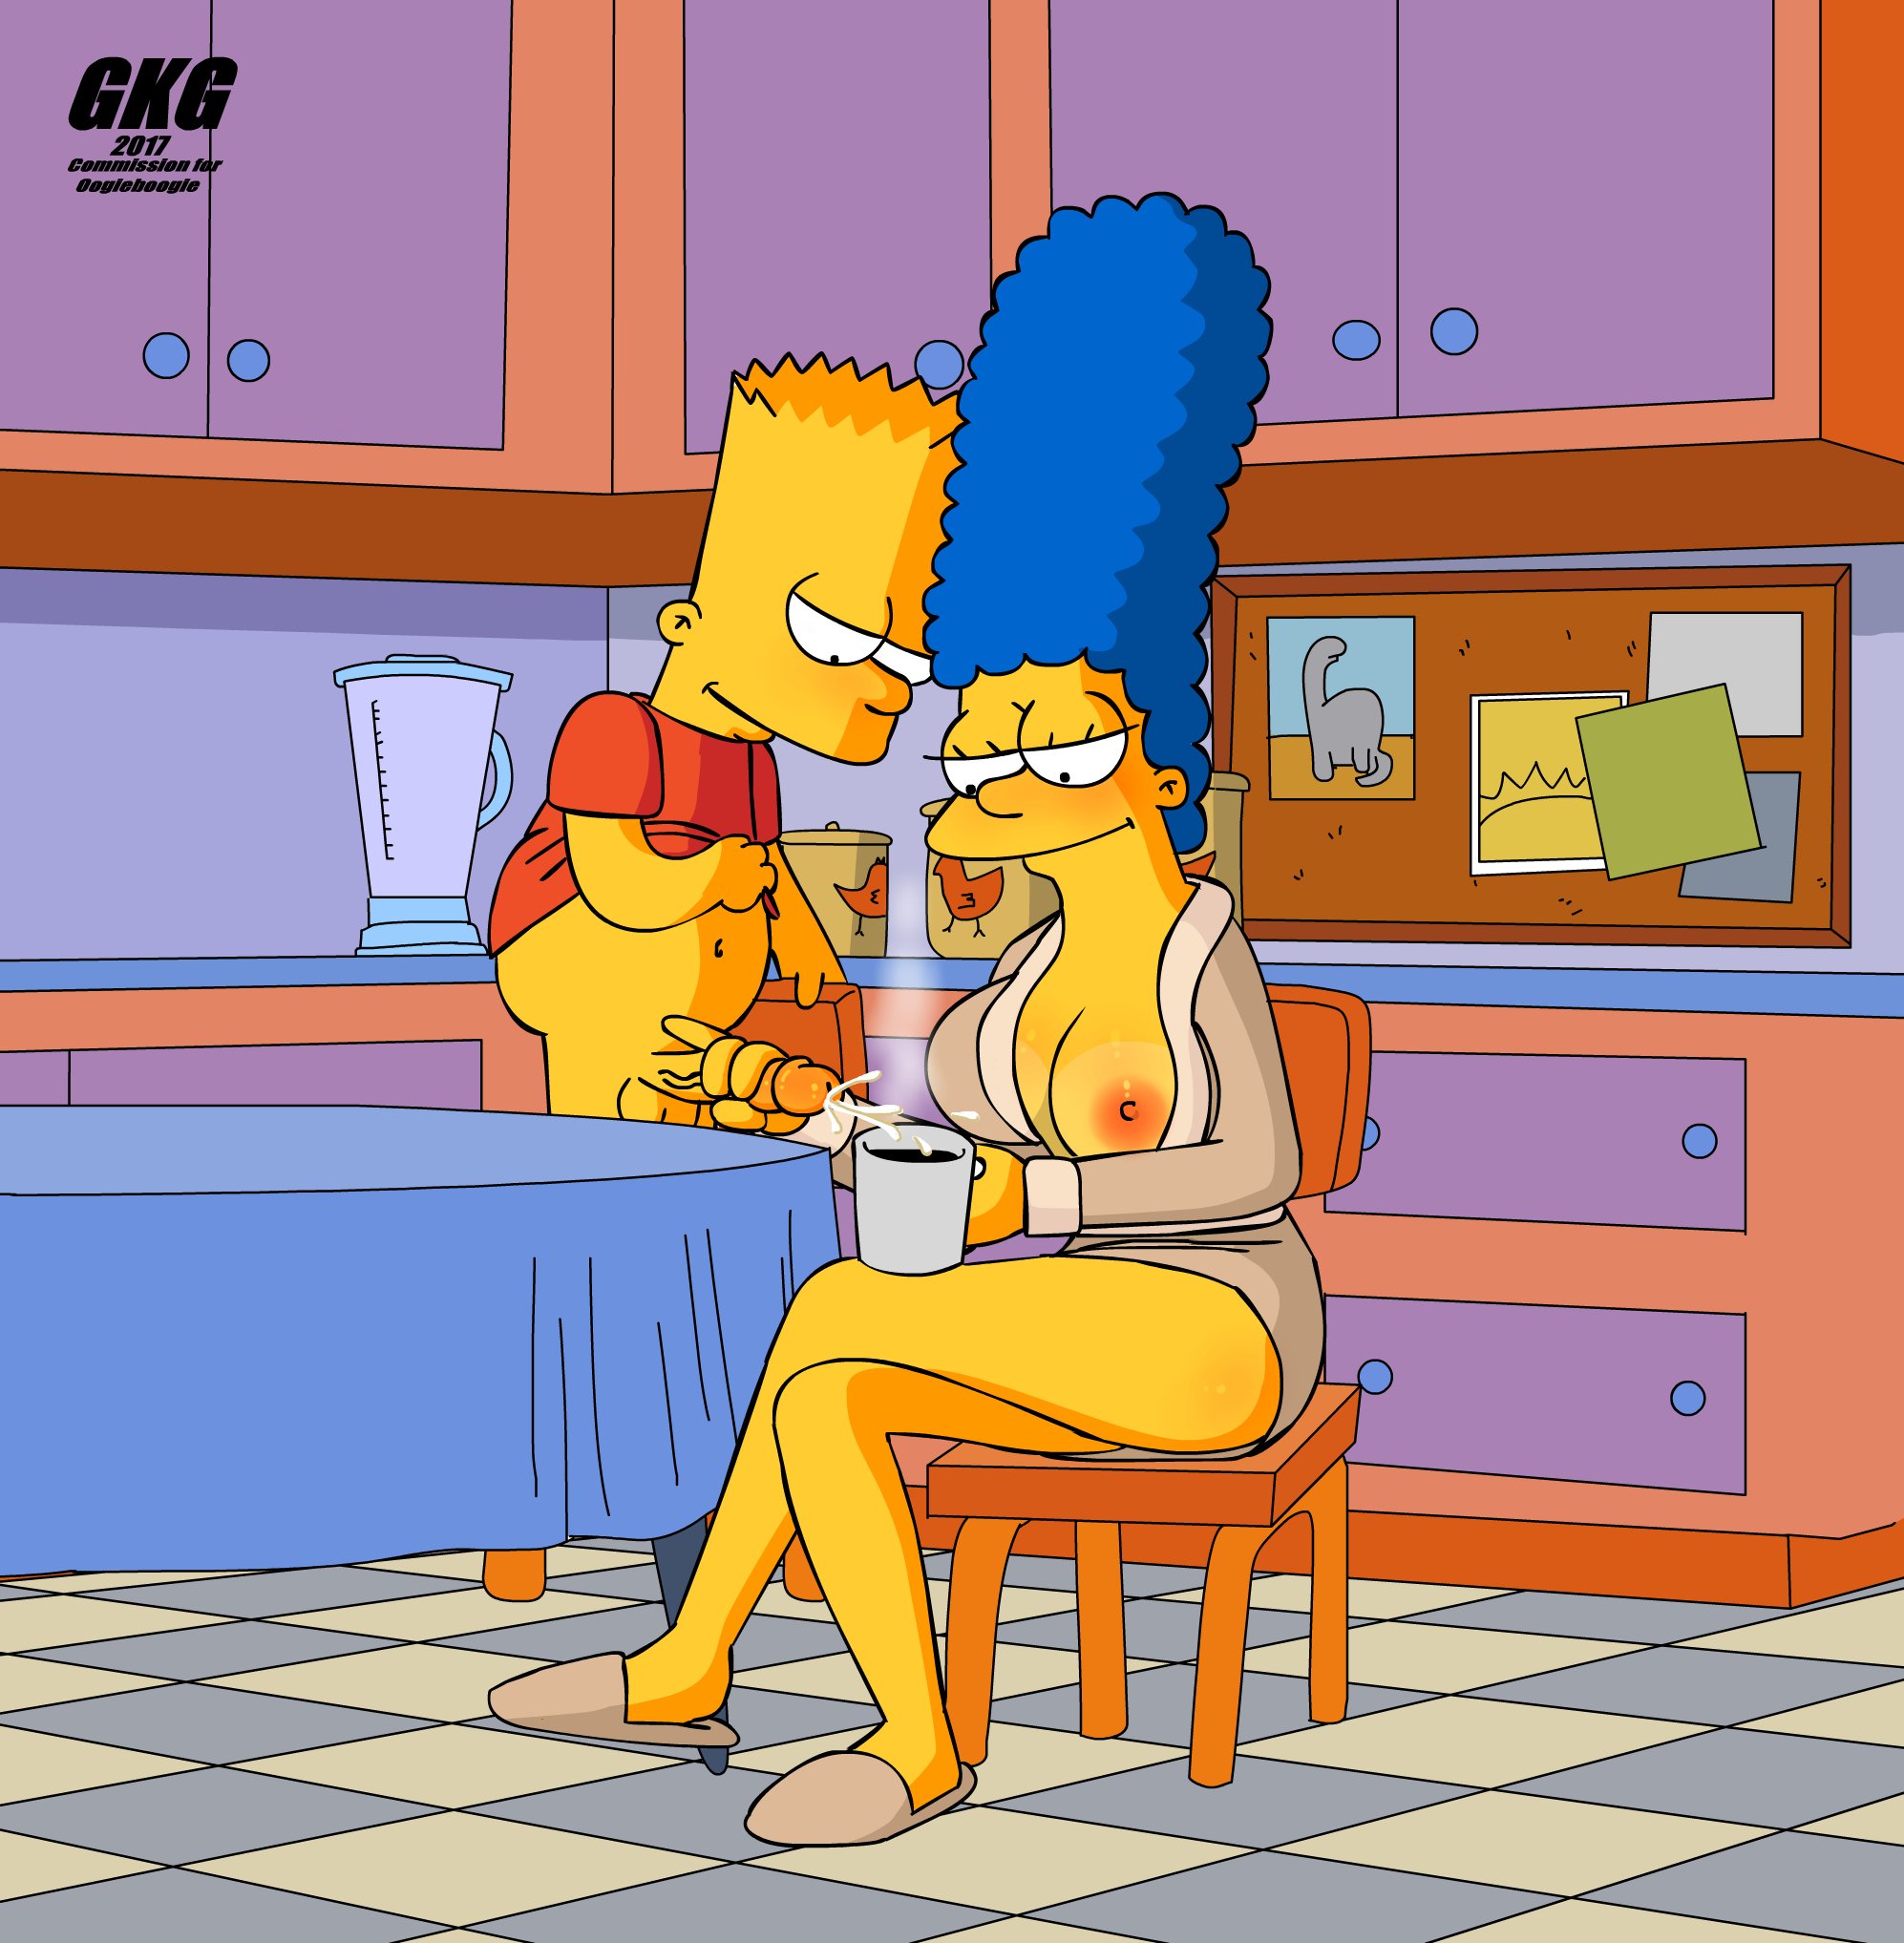 Mommy Simpsons ❤ on Twitter: "#goodmorning #cumcoffe #motherandson #mo...